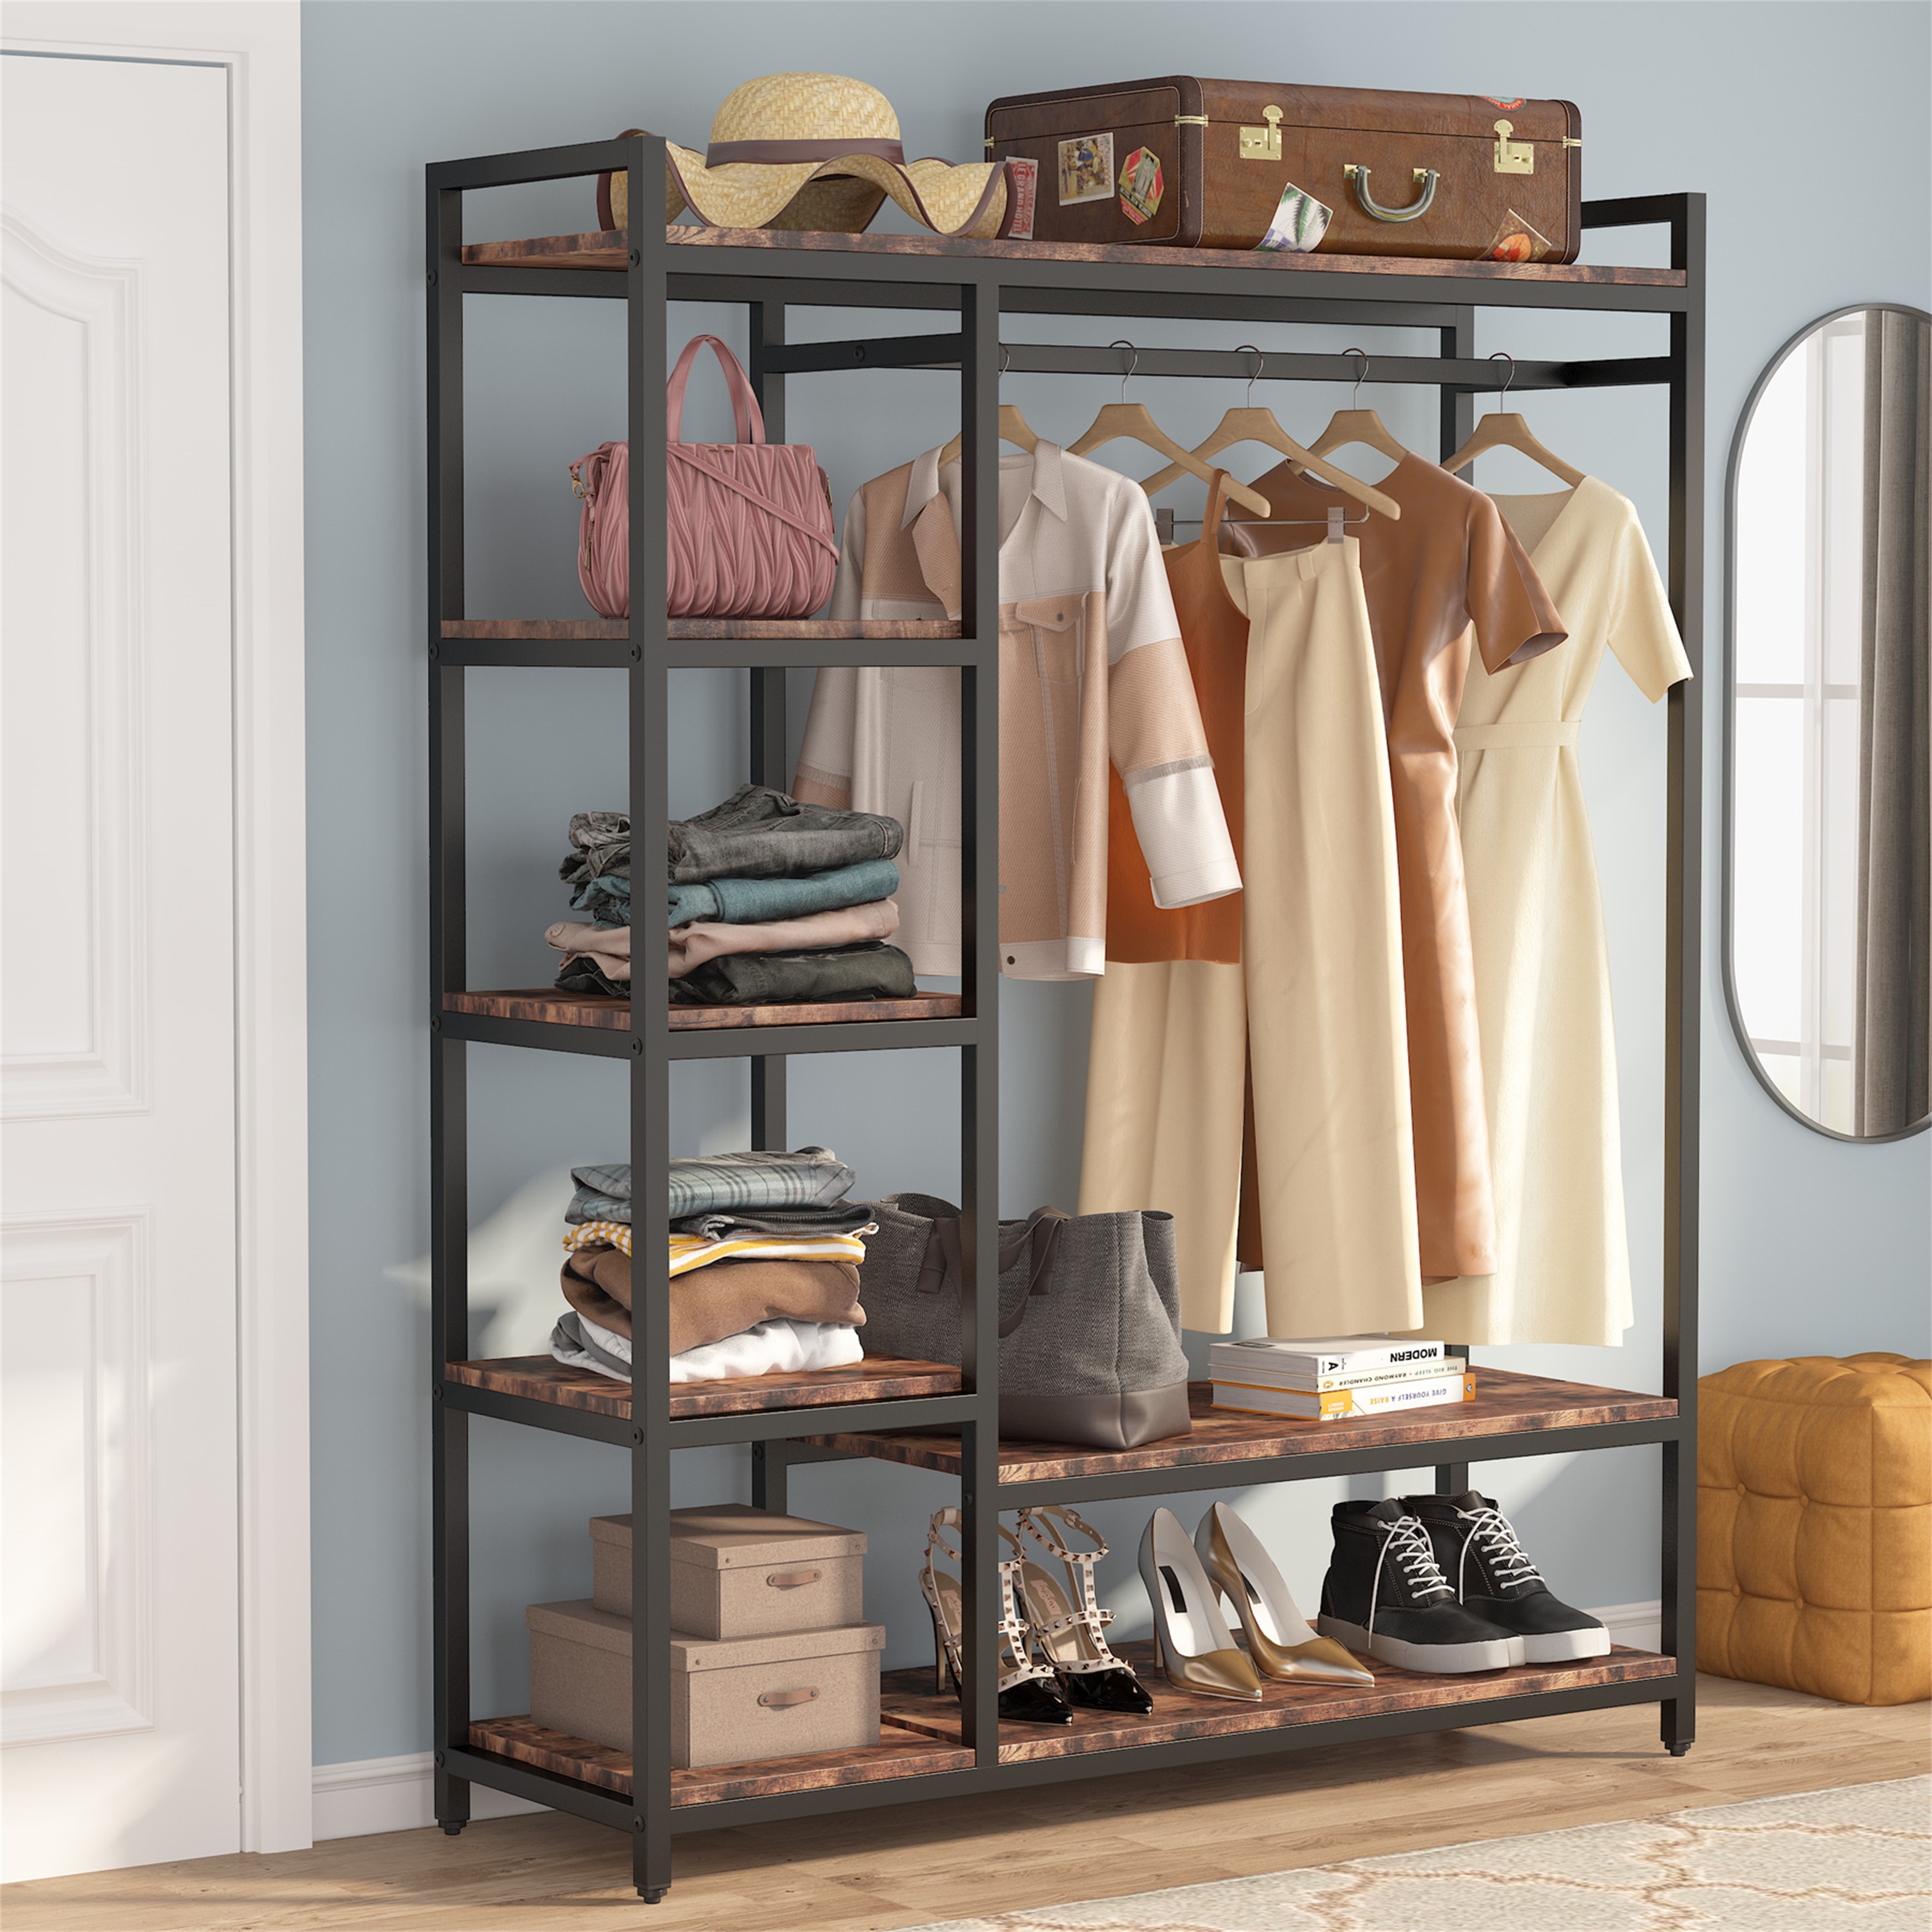 https://ak1.ostkcdn.com/images/products/is/images/direct/439a1ff637c95bcc404ca5f4cd1983c9e85bc588/Black--White-Modern-Clothes-Garment-Rack%2CMetal-and-Wood-Closet-Rack-Closet-Organizer-System-with-Hanging-Rod-and-Shelf.jpg